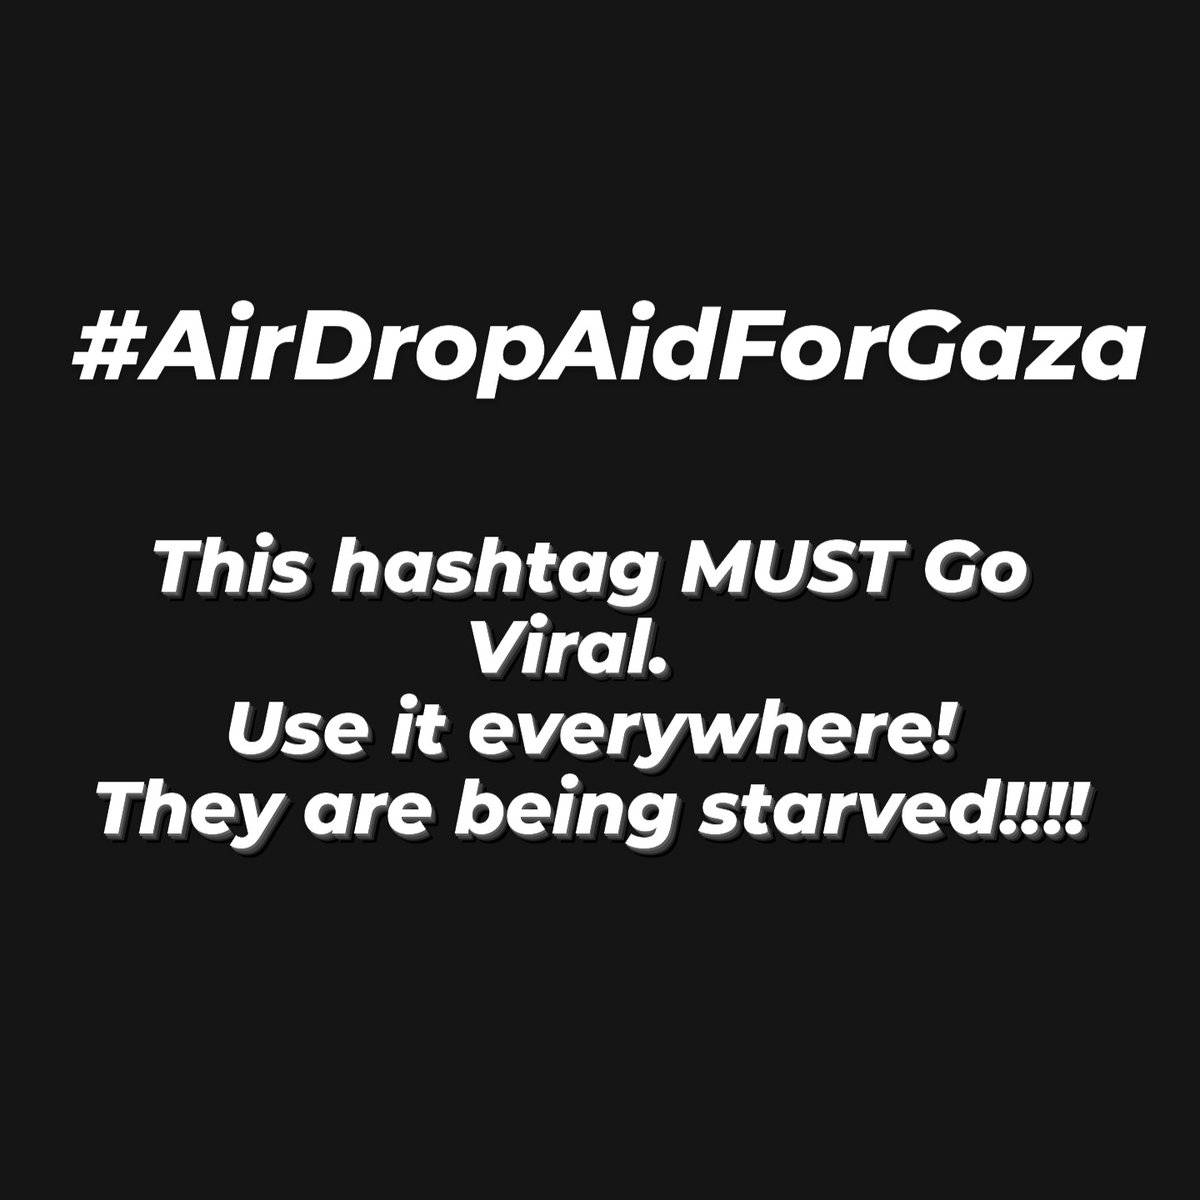 They are dying 
#AirDropAidForGaza #FreePalestine #Ukcomplicitogenocide #ukcomplicit 
#uscomplicit #ethniccleansing
#forceddisplacement 
#palestinianholocaust 
#gazaconcentrationcamp #us4icc  
#genocidecomplicity 
#israeligenocide #israel4icc 
#israelgenocideonpalestine